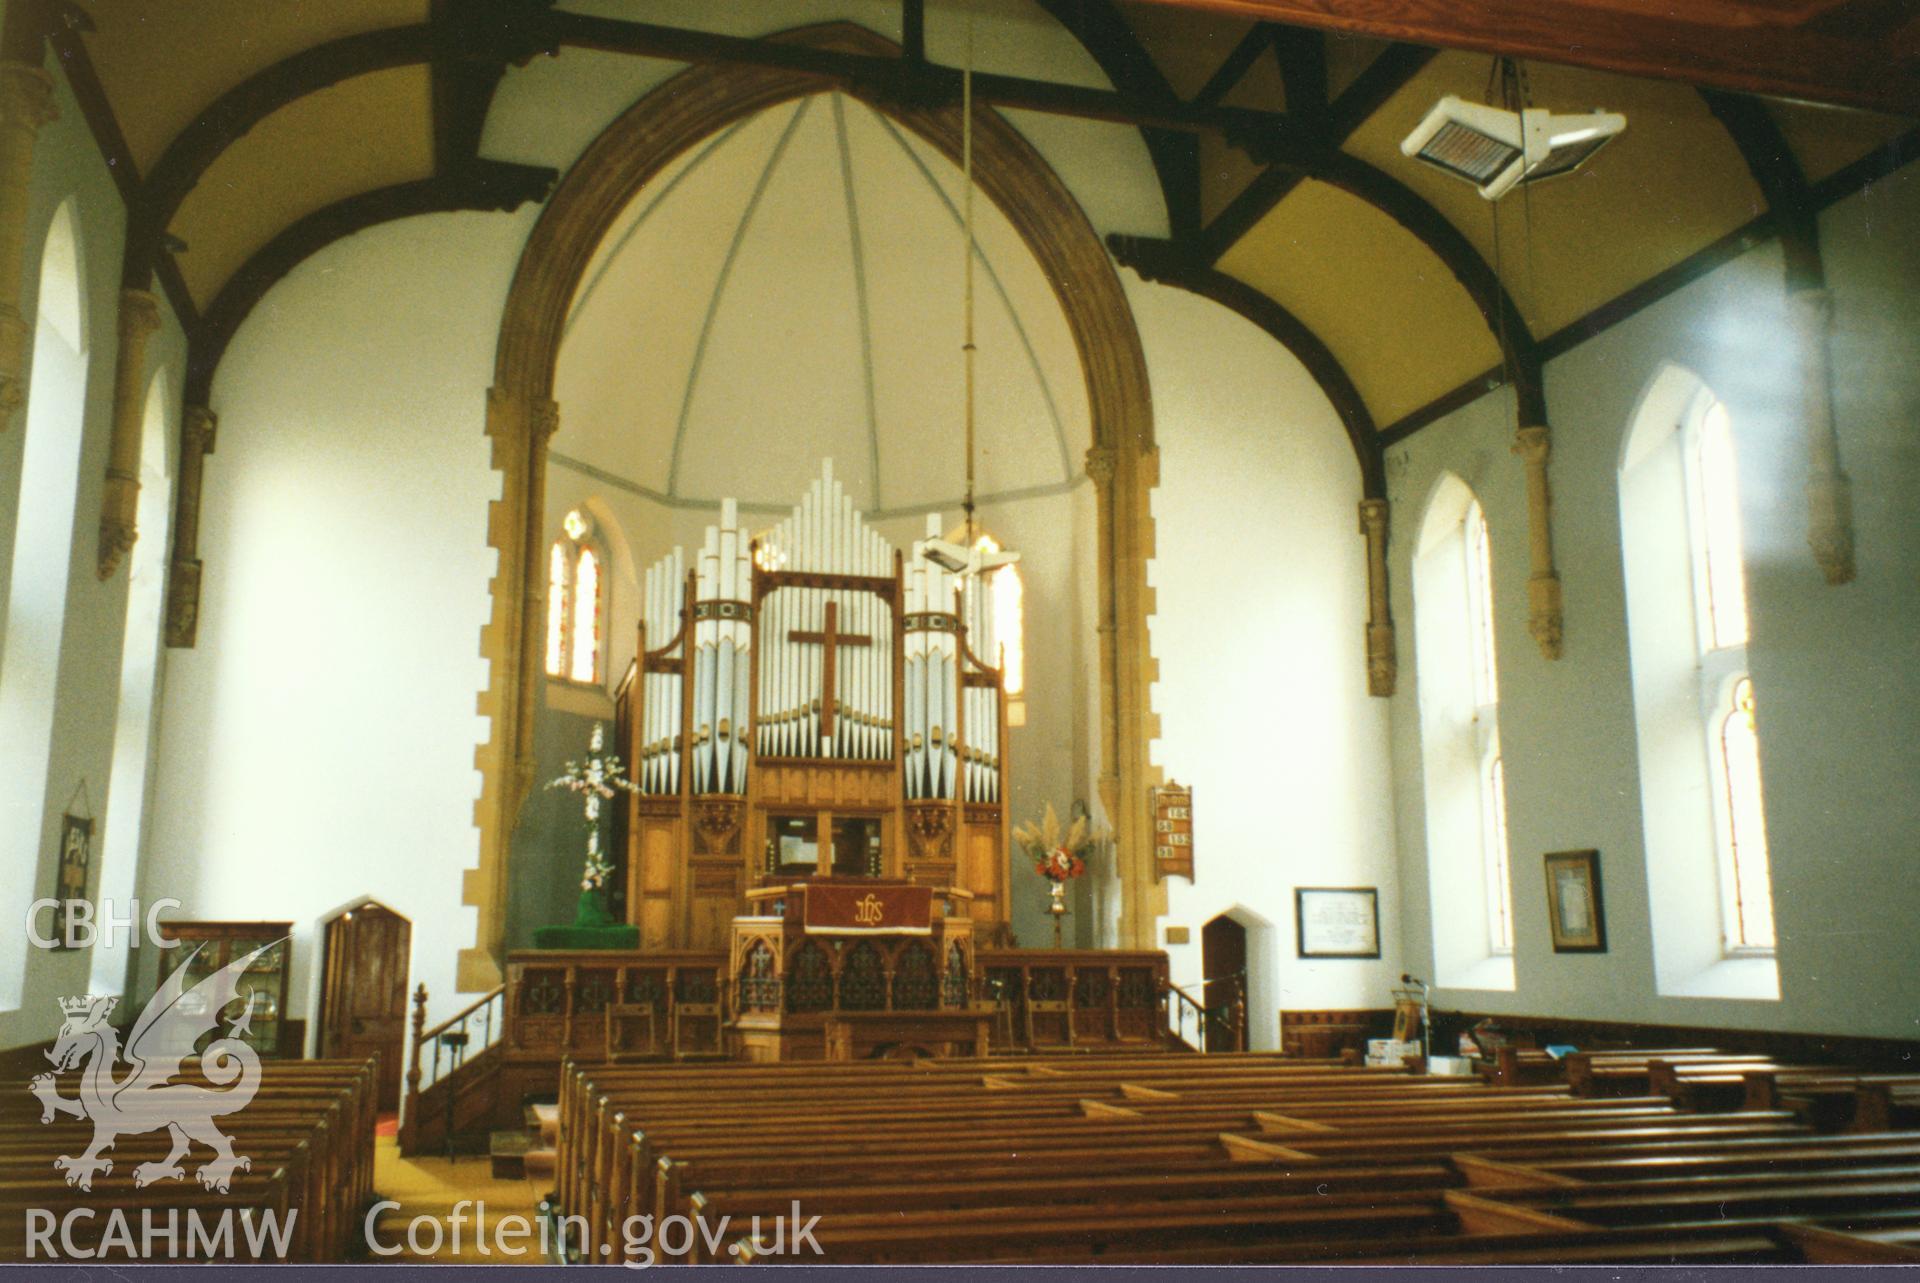 Digital copy of a colour photograph showing interior view of Deer Park English Baptist Chapel, Tenby,  taken by Robert Scourfield, 1996.